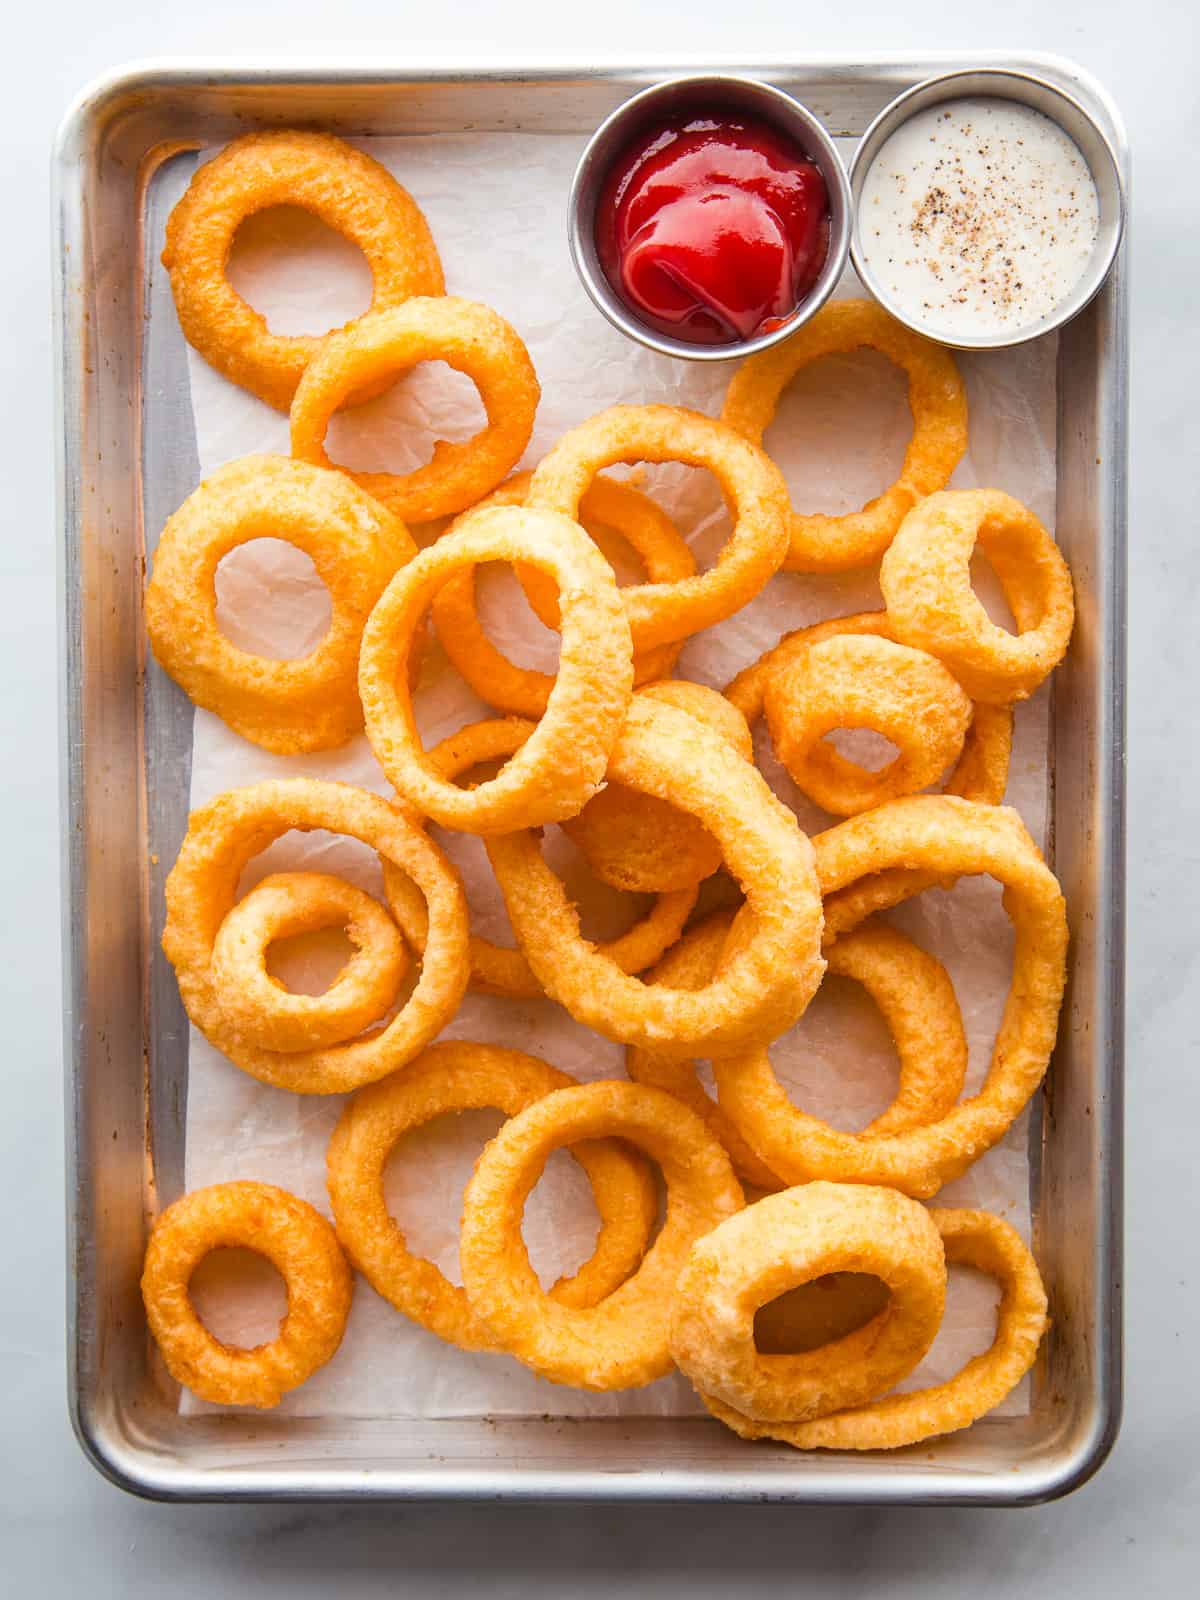 Gluten-free onion rings, along with ketchup and ranch dressing, on a baking sheet.